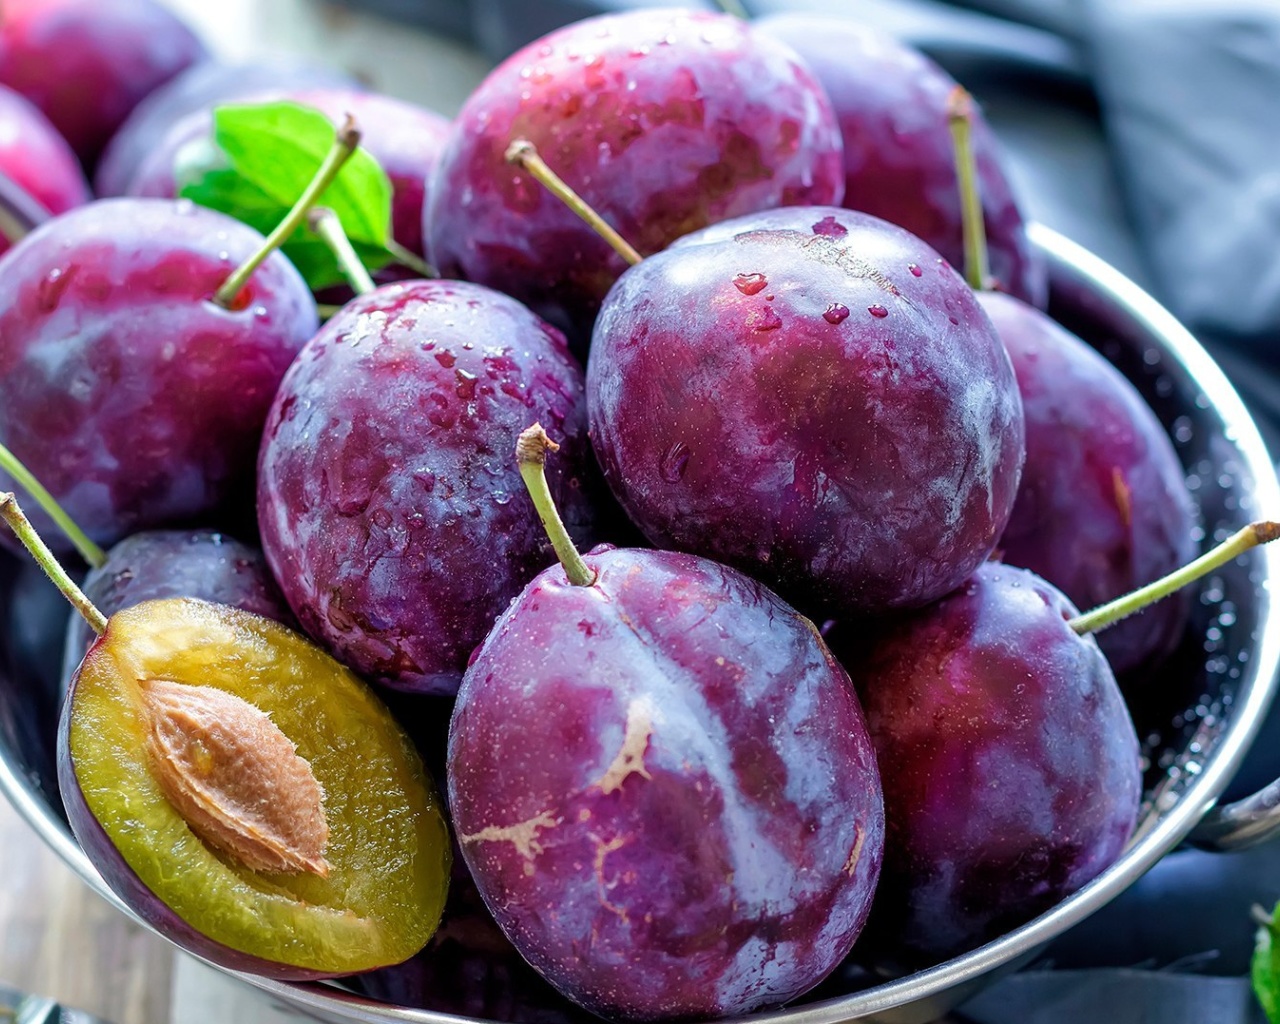 Das Plums with Vitamins Wallpaper 1280x1024